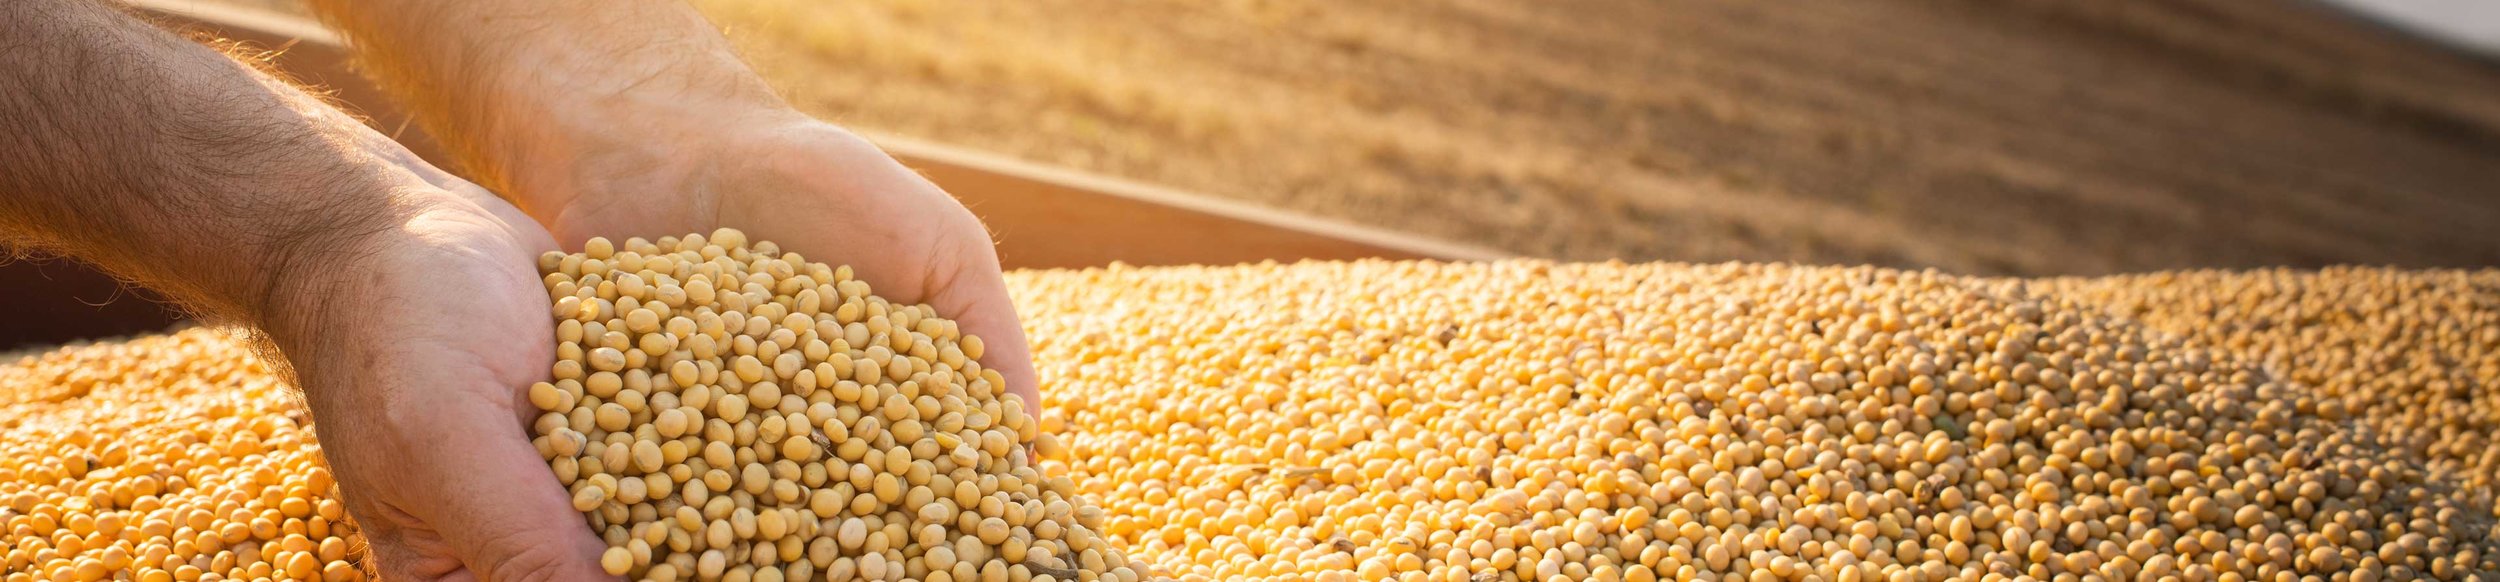 Globally important, the widely grown soybeans are rich in oil and protein.